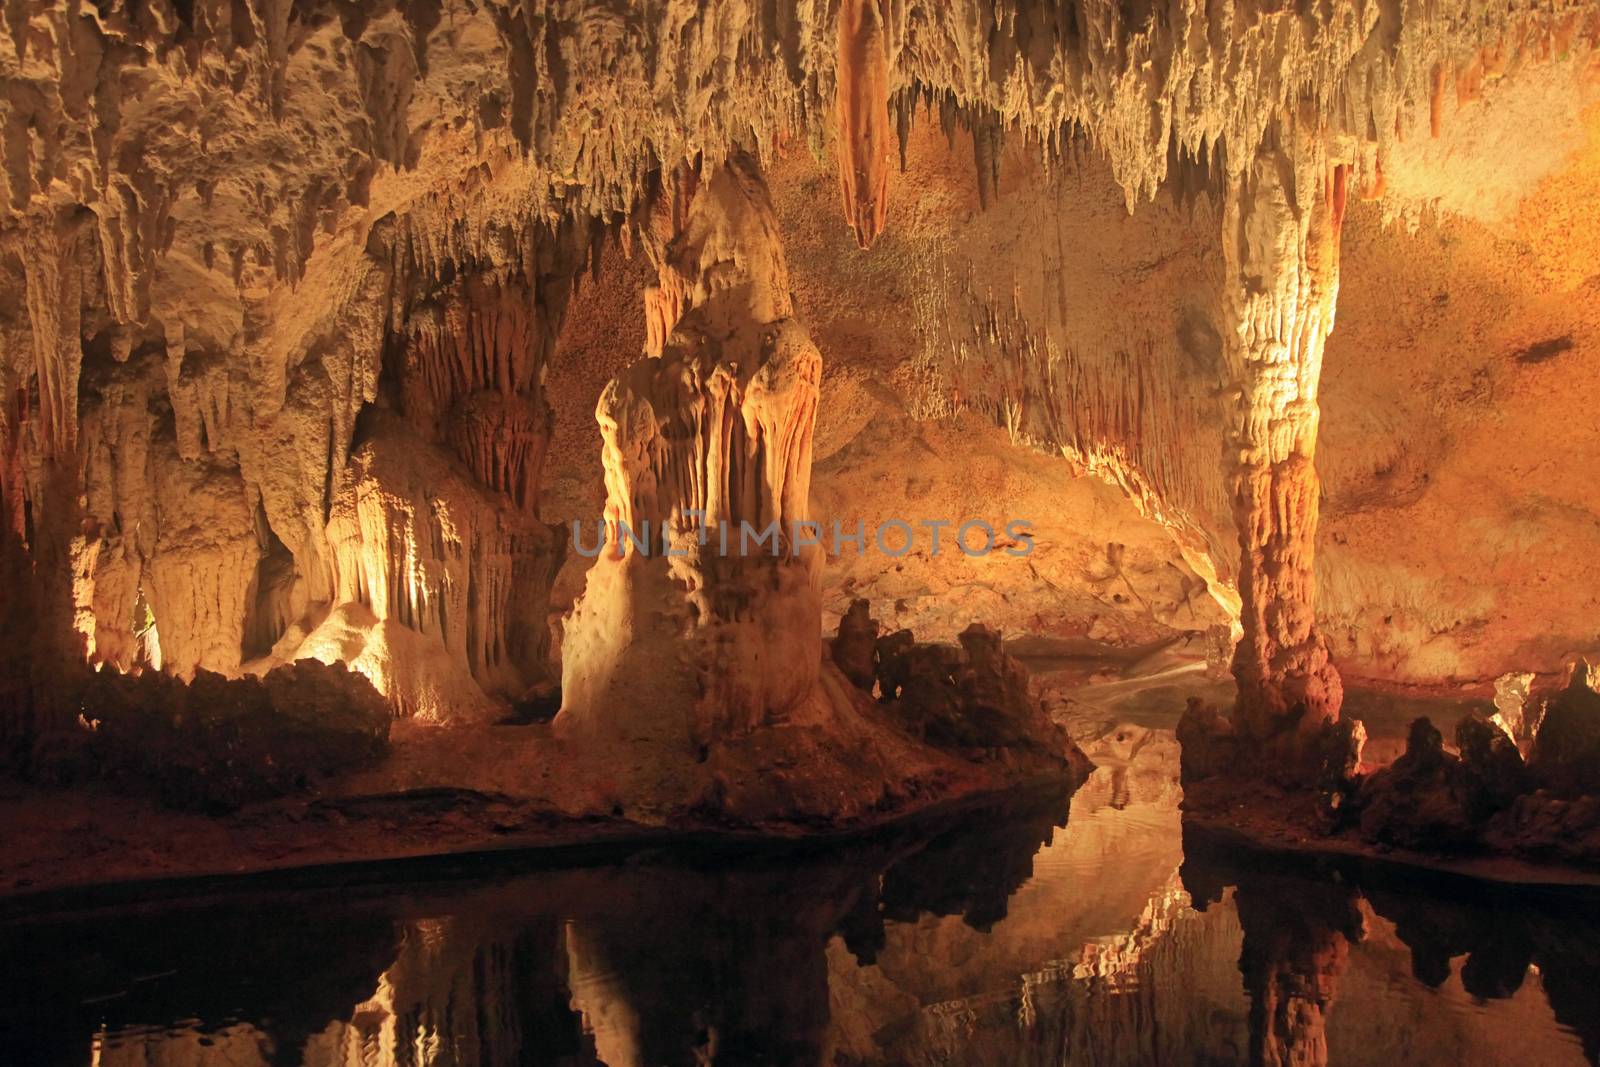 Cueva de las Maravillas. Cave of Wonders - one of the main natural attractions of the Dominican Republic, preserved in its original form